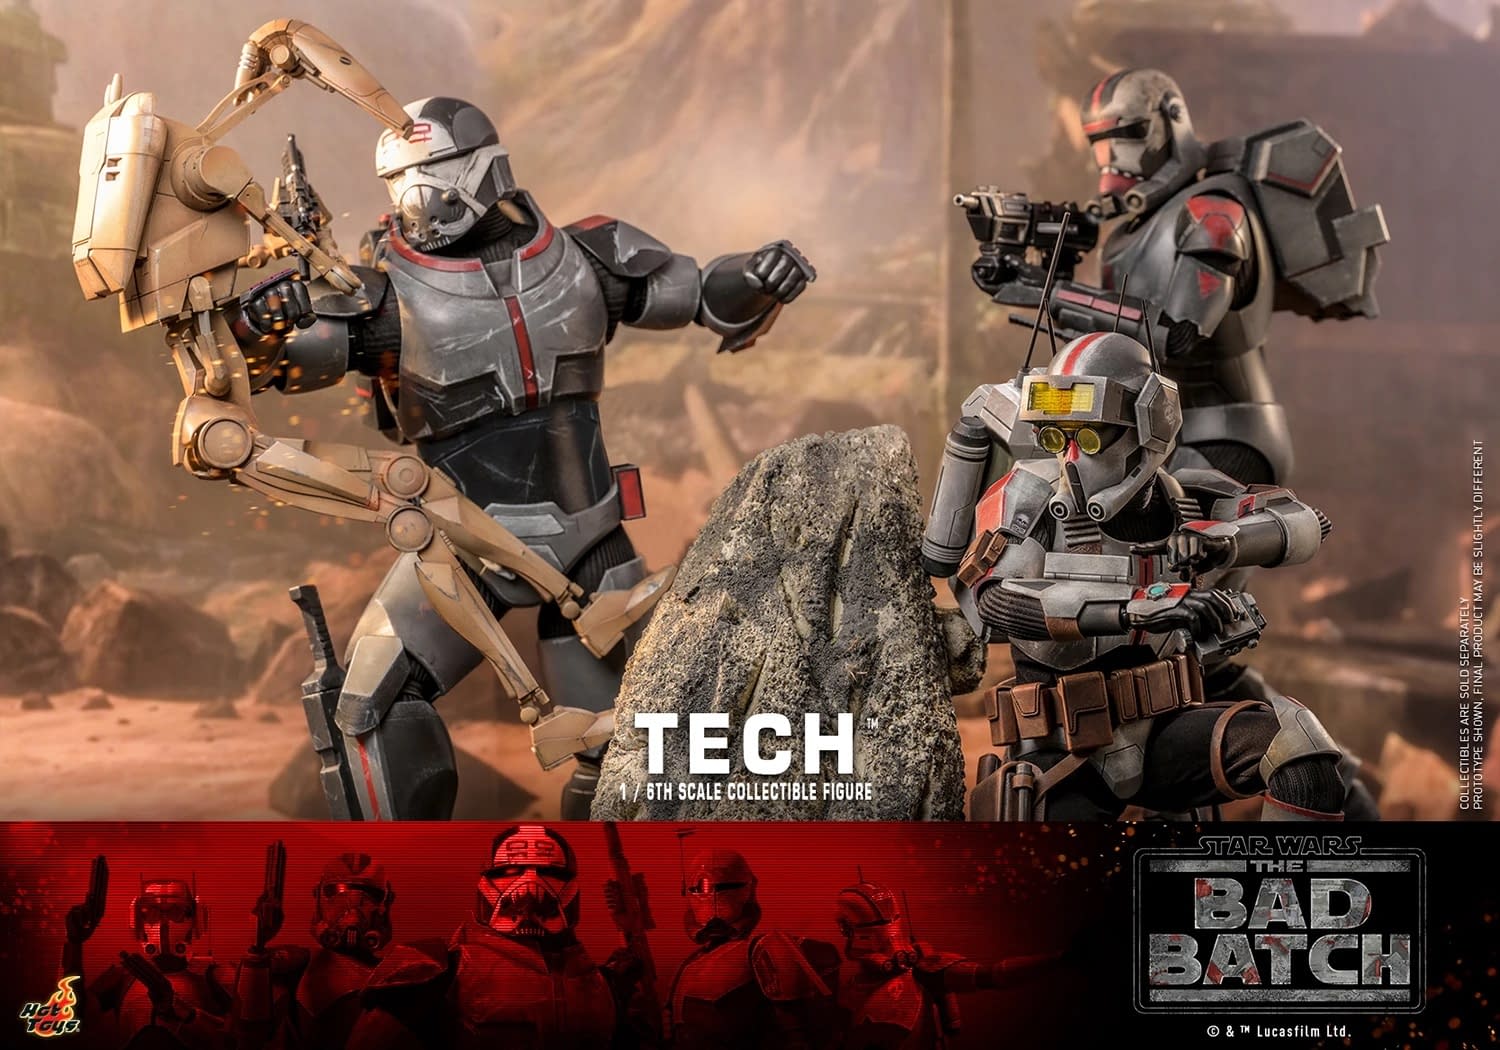 Bring The Bad Batch Adventures Home with Sideshow Collectibles